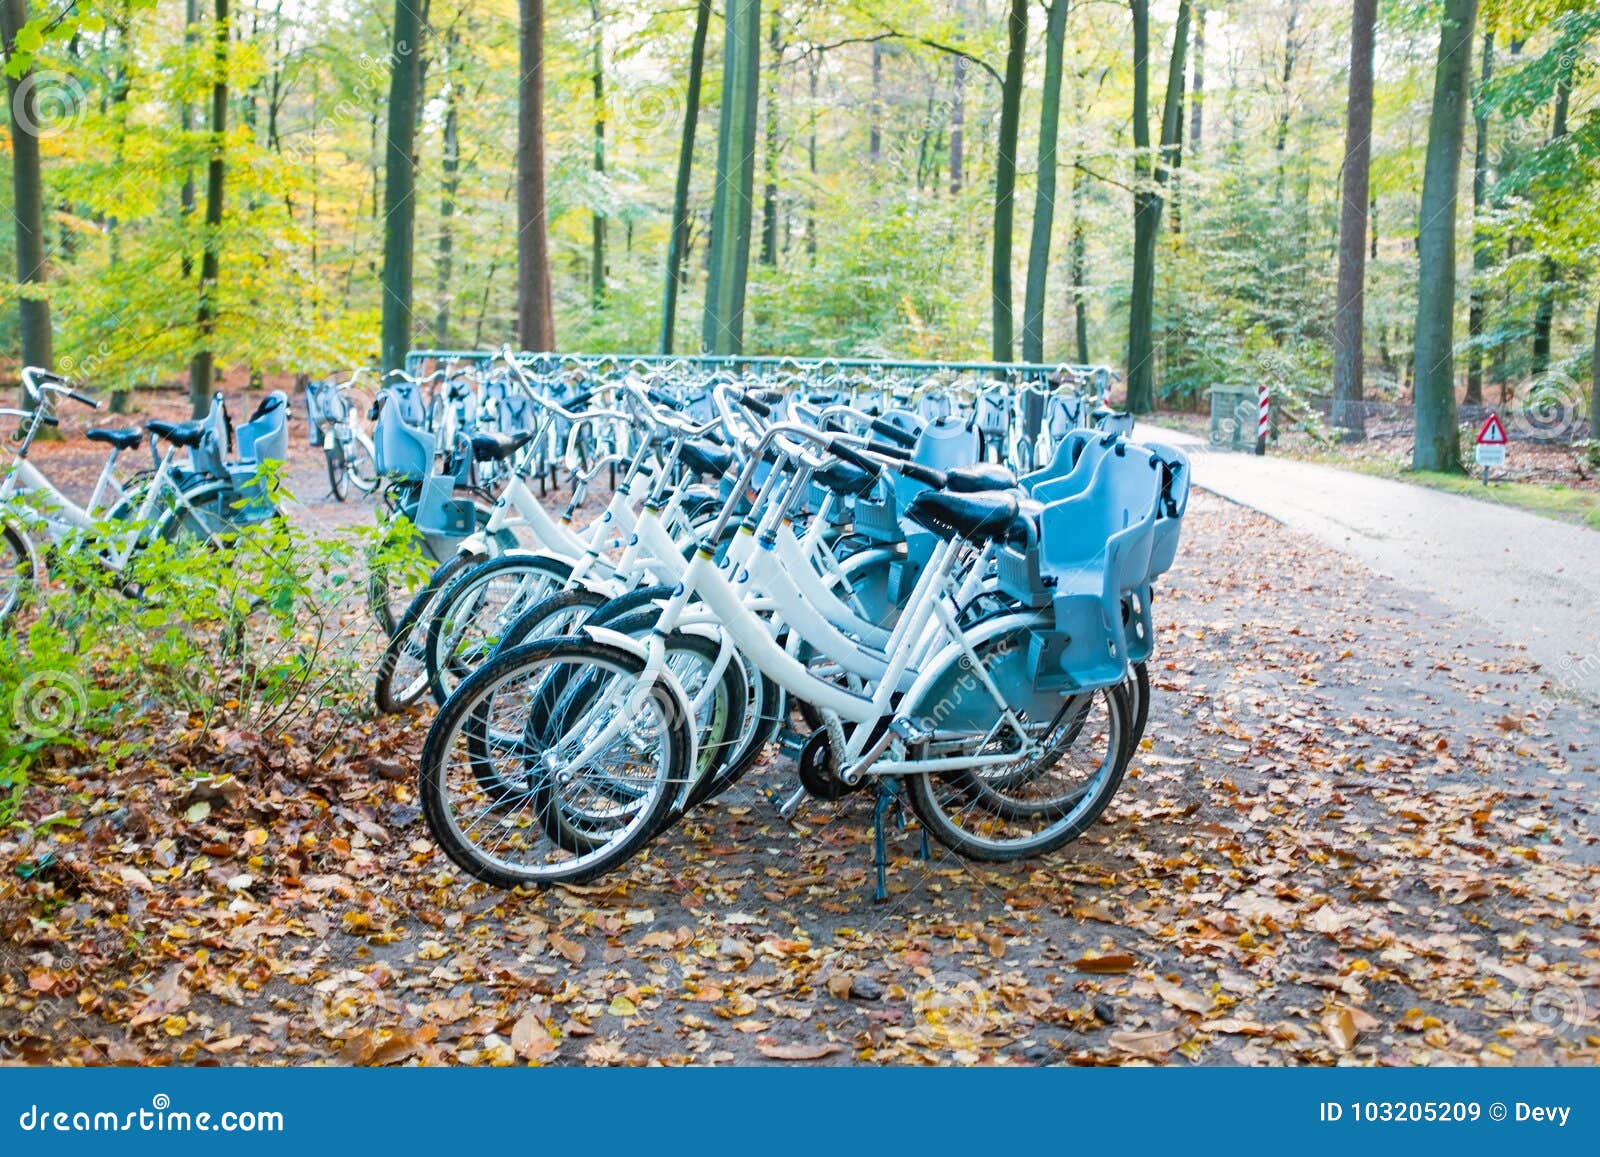 bicycles in the forest at the hoge veluwe netherlands